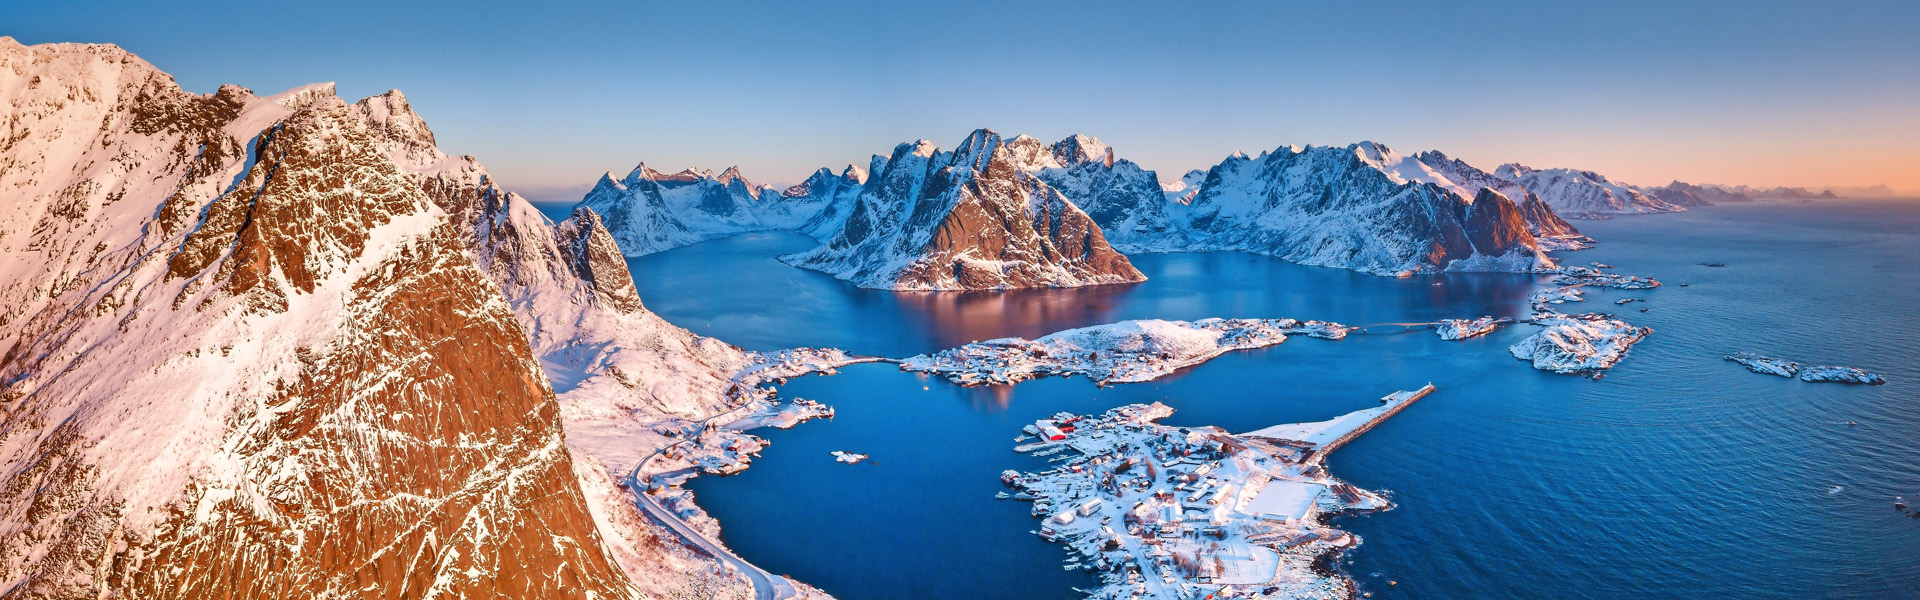 Aerial panoramic view of amazing Lofoten Islands winter scenery with famous Reine fishing village in beautiful golden morning light at sunrise, Norway, Scandinavia.